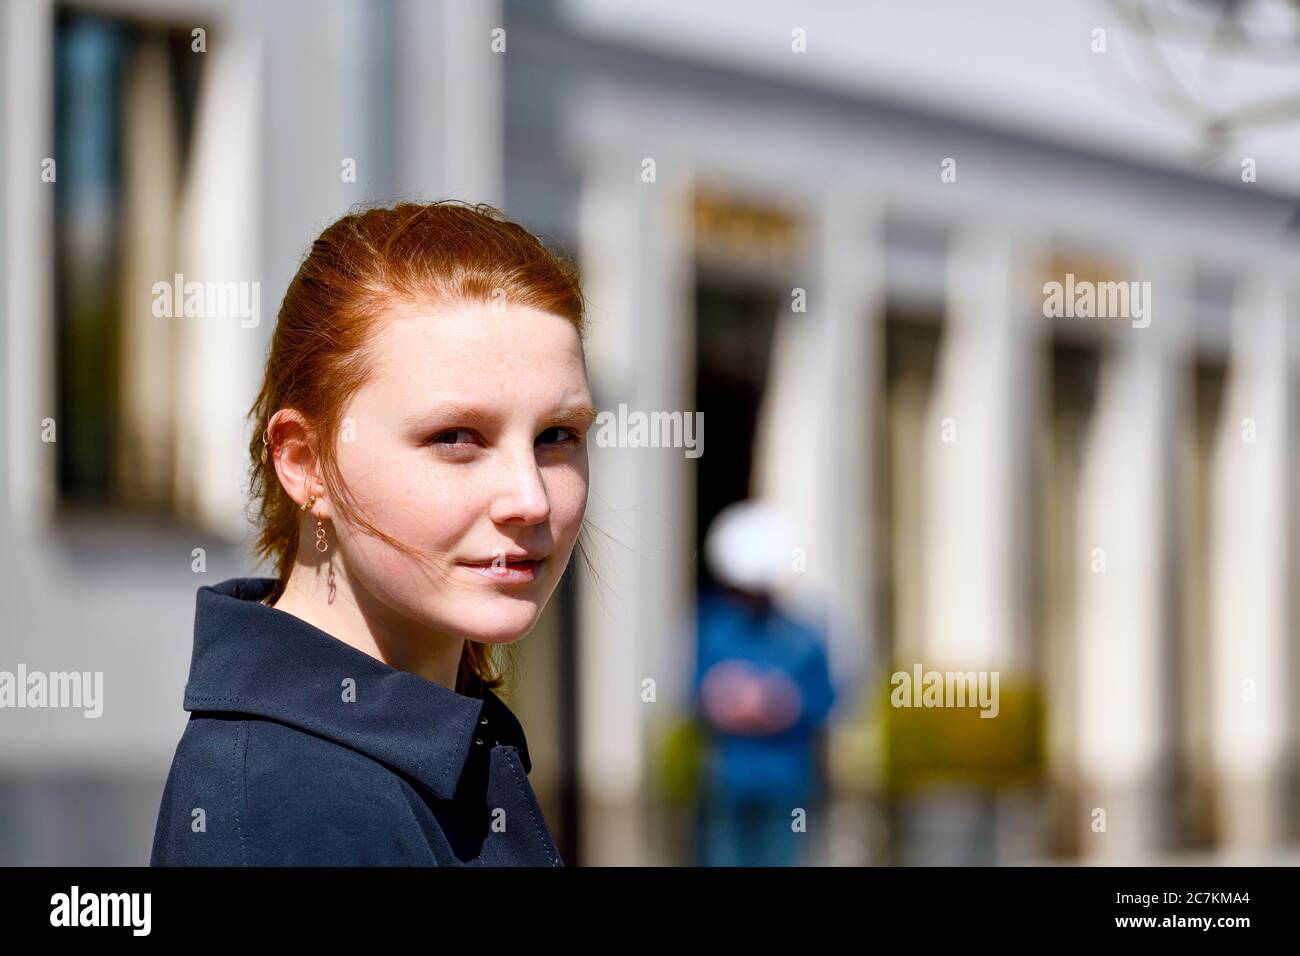 Young girl with reddish hair smiles at camera portrait, outside, side view Stock Photo